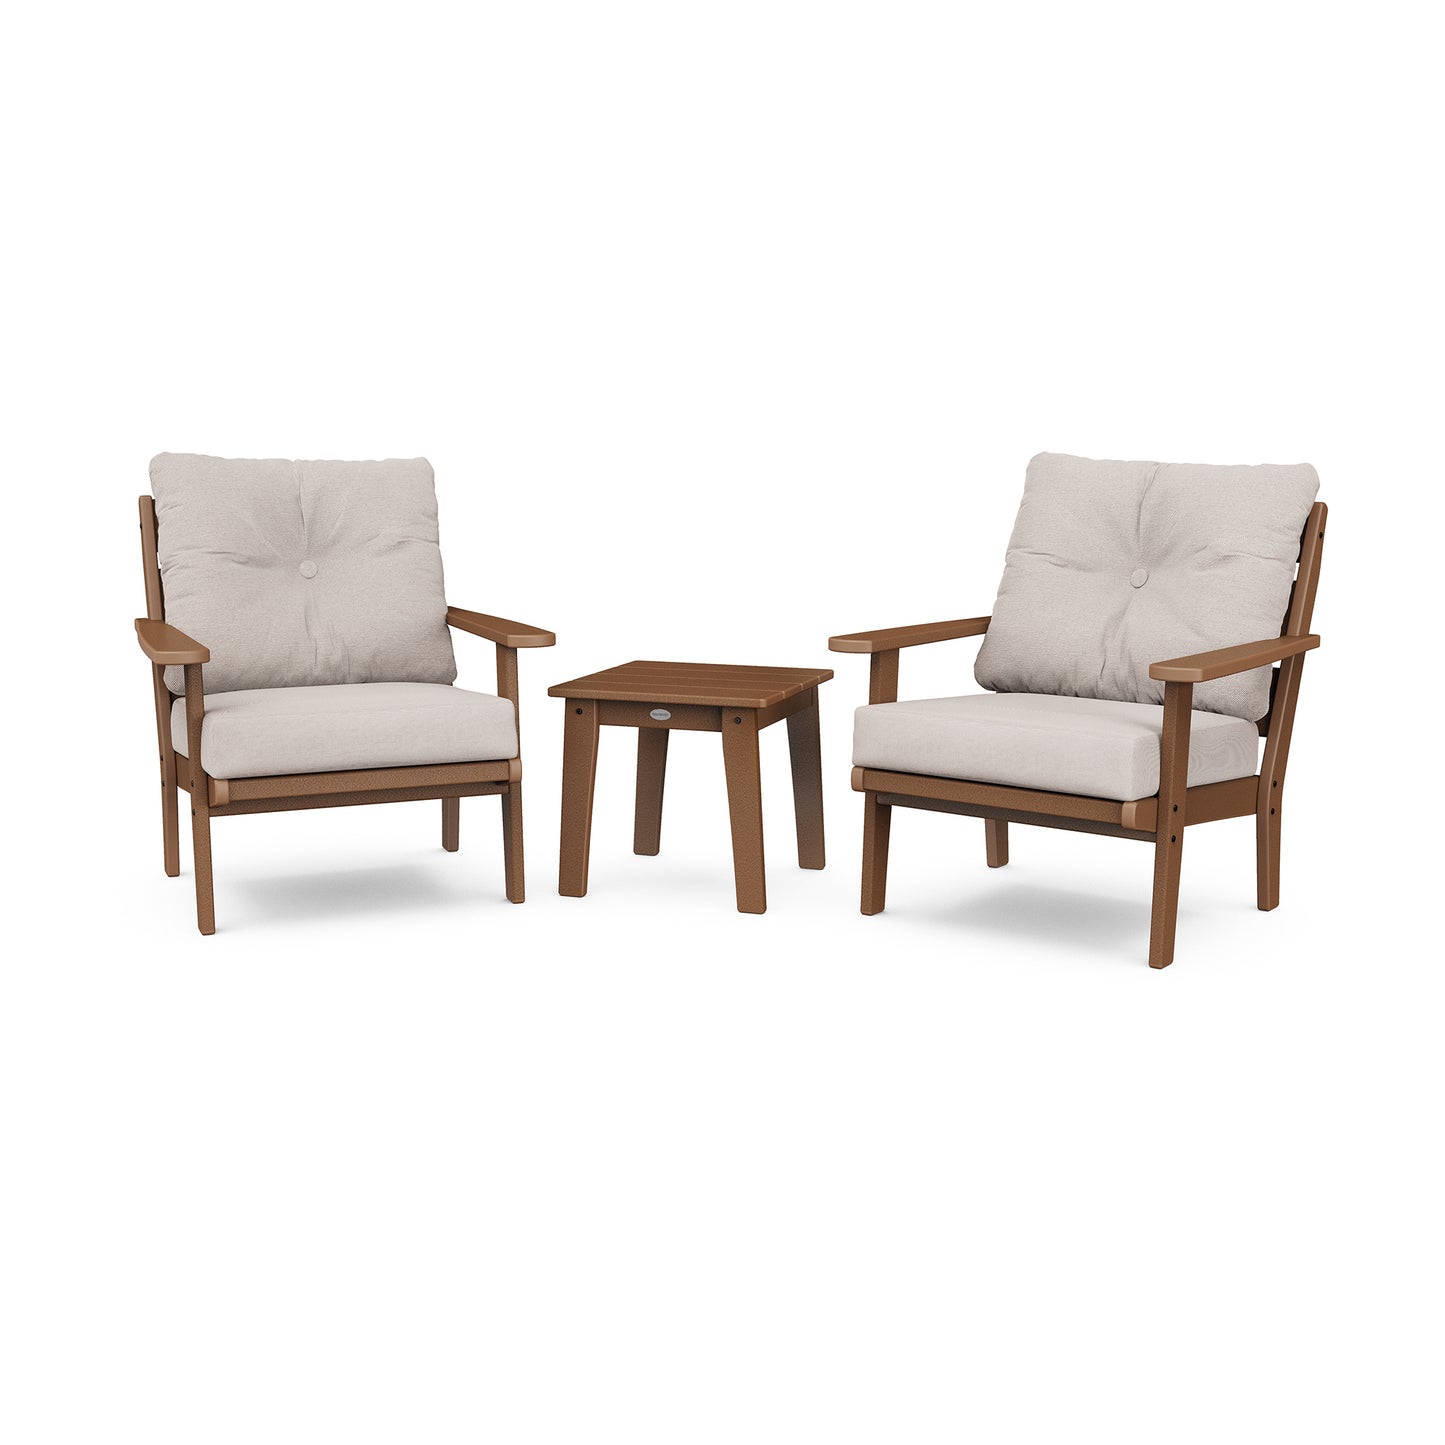 Two POLYWOOD Lakeside 3-Piece Deep Seating Chair Sets with taupe cushions and a matching small square table, isolated on a white background.